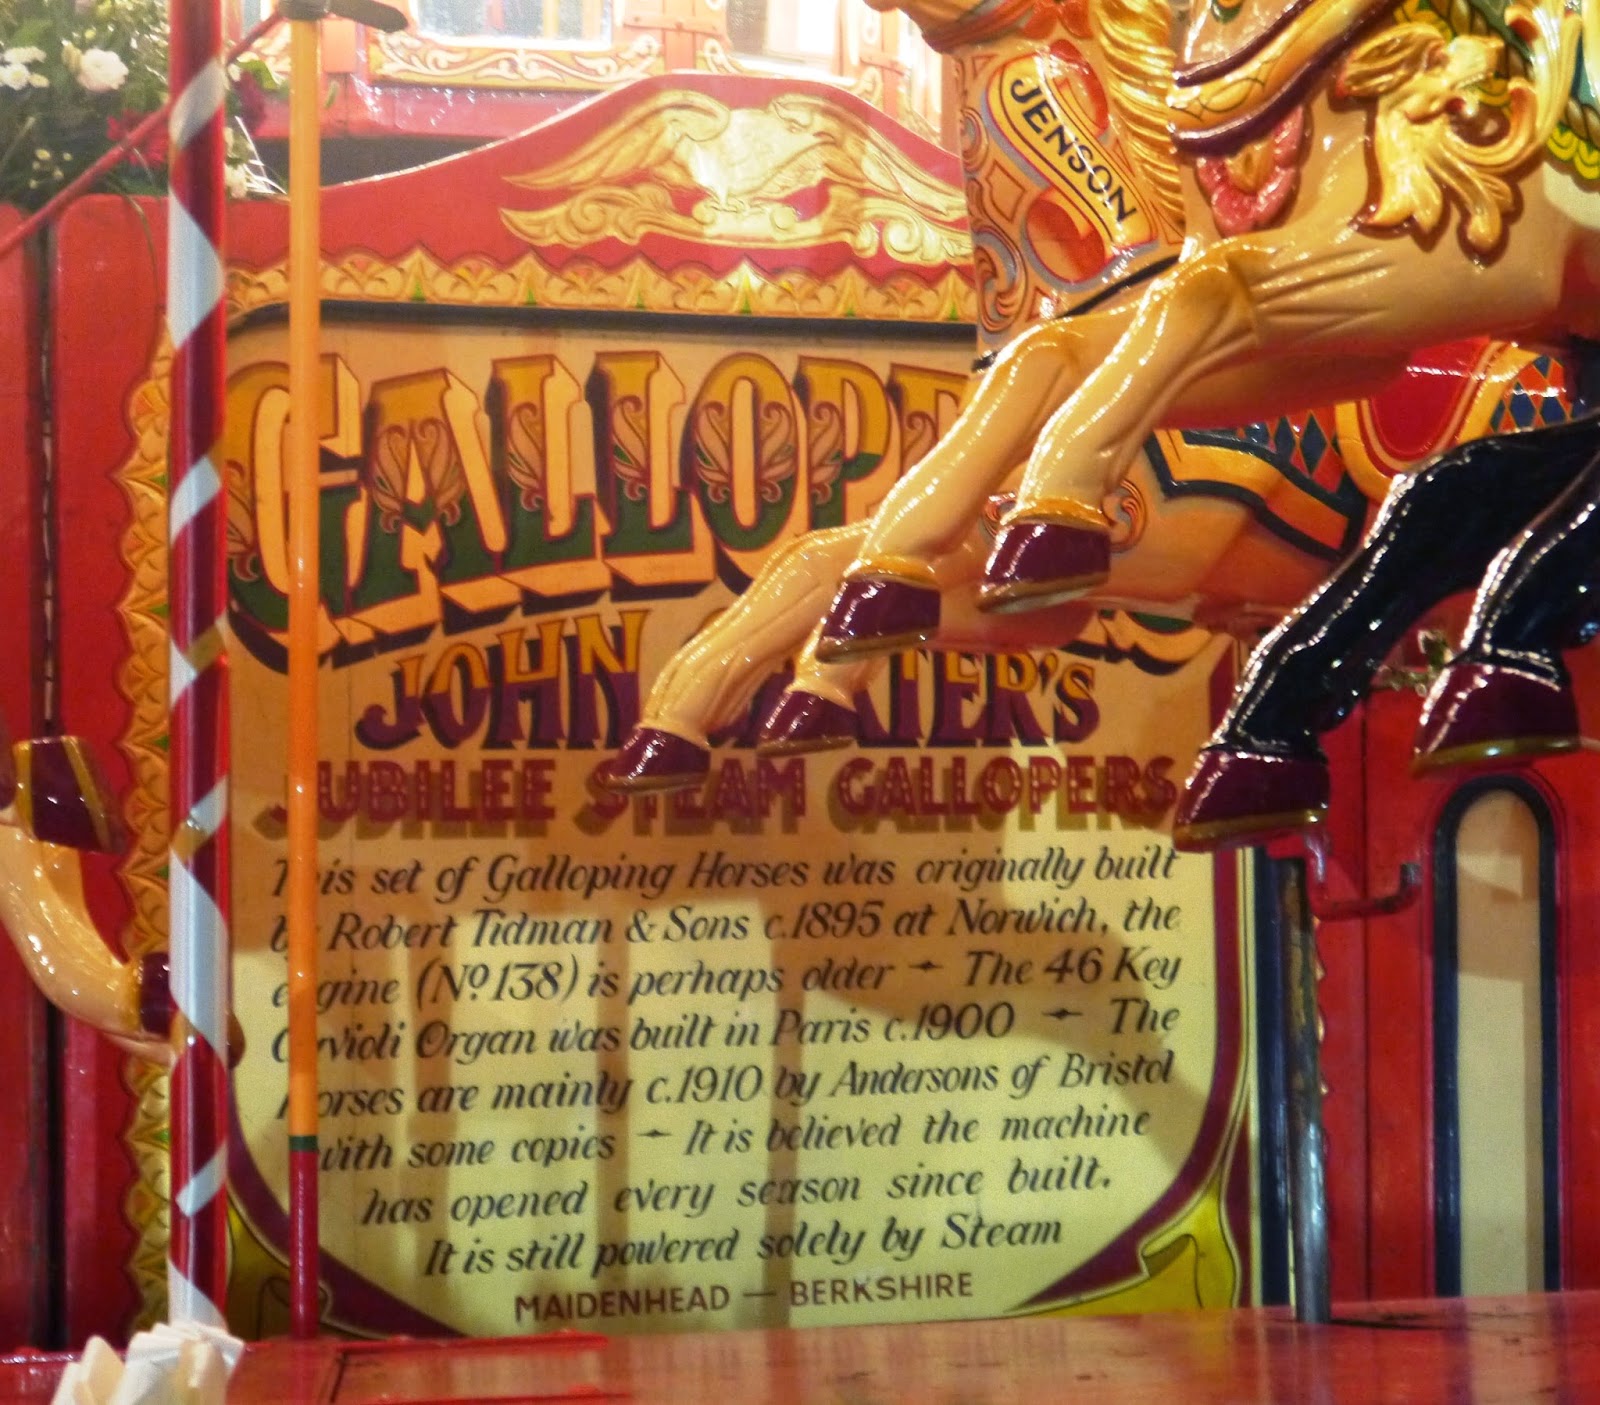 Carter's Gallopers